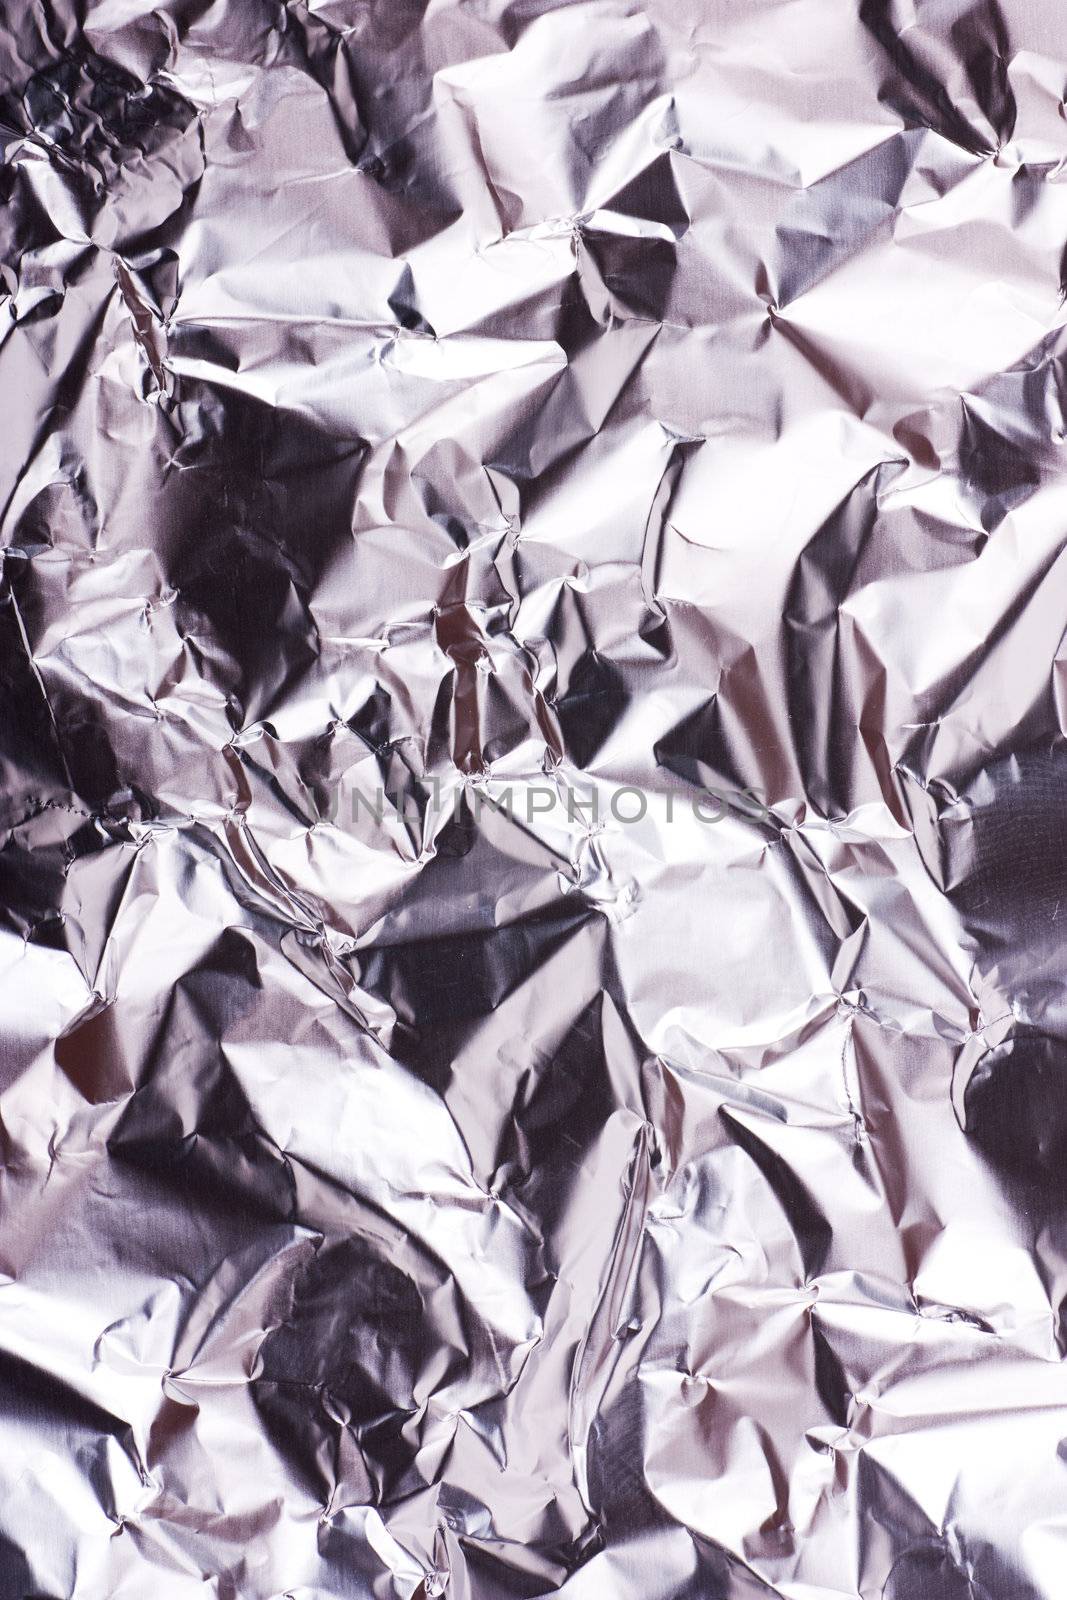 Macro view of background with aluminium foil